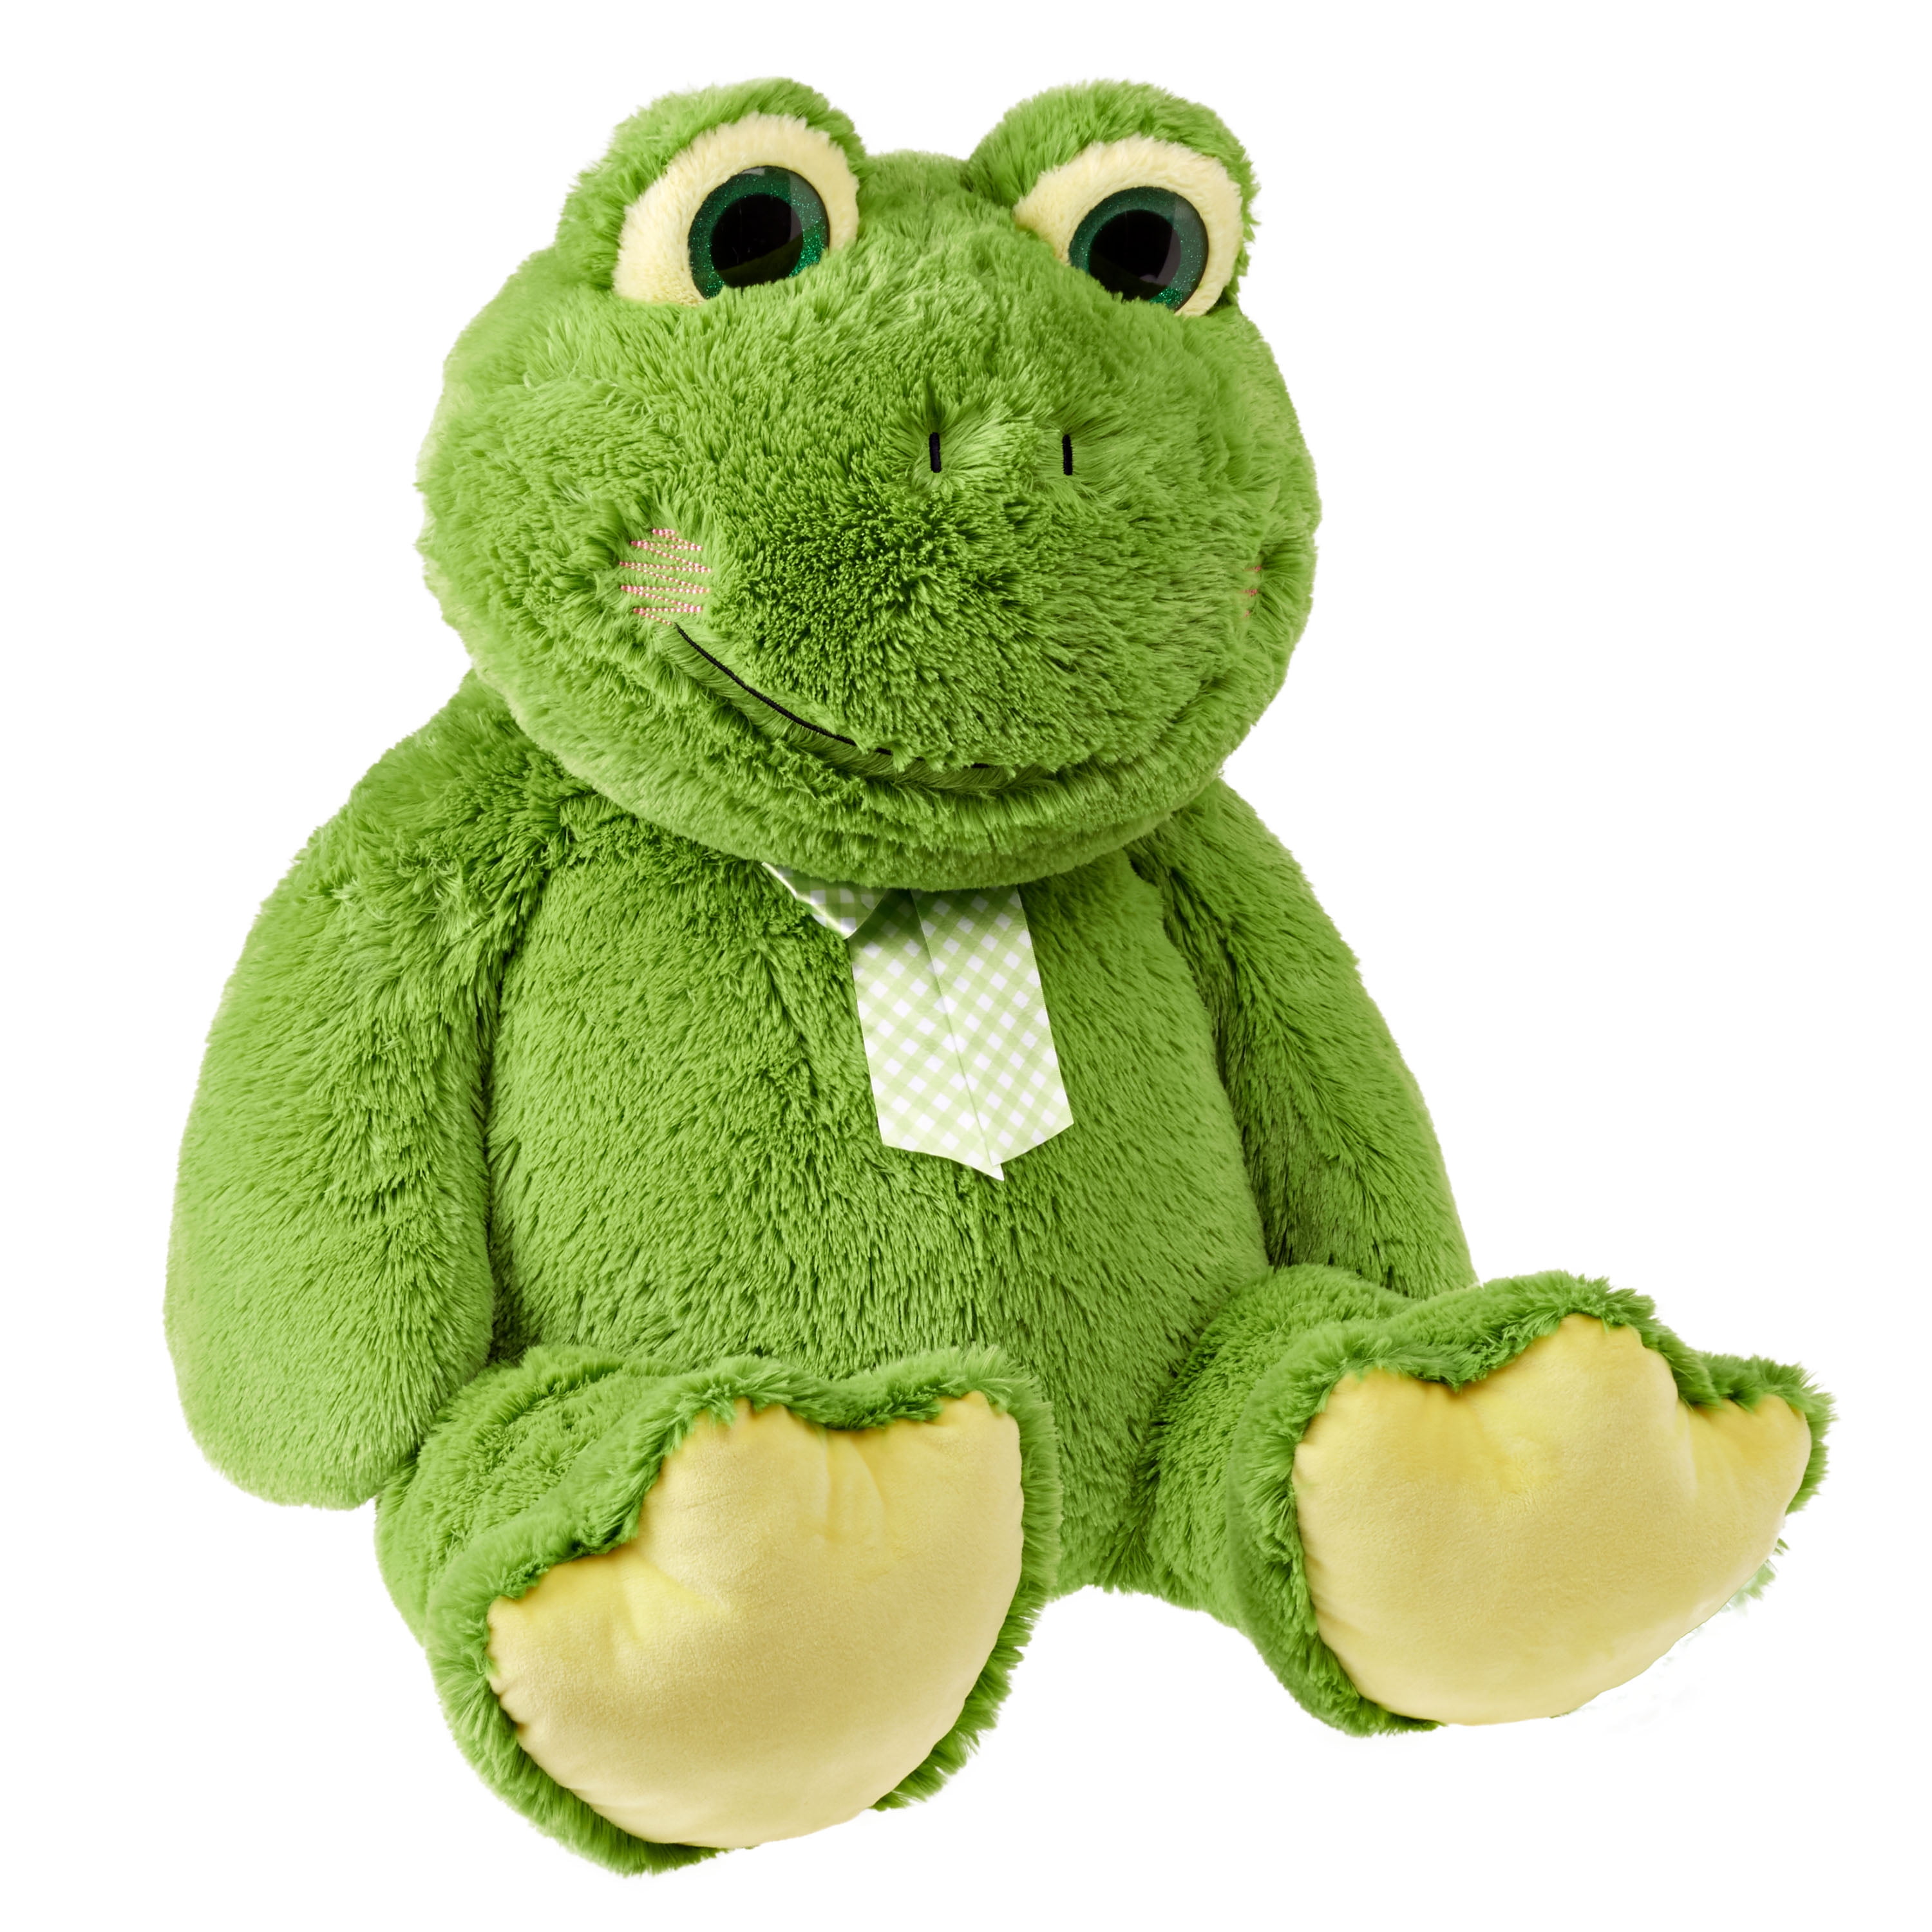 Details about   14" Big Eyes Green Frog I LOVE YOU Valentine Stuffed Animal Plush Red Heart NEW 